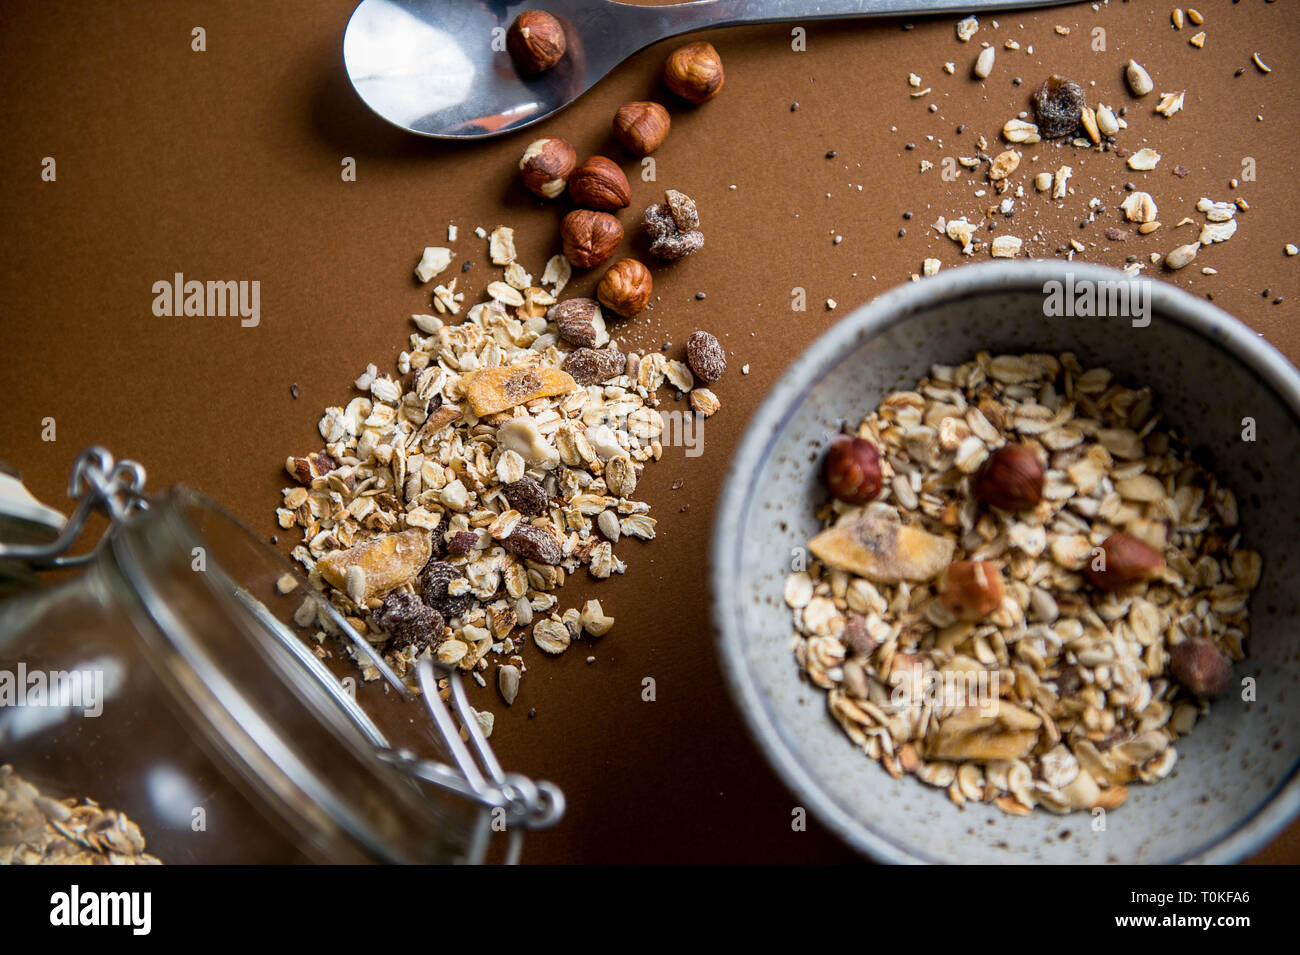 Breakfast cereal spilled on a brown backdrop Stock Photo